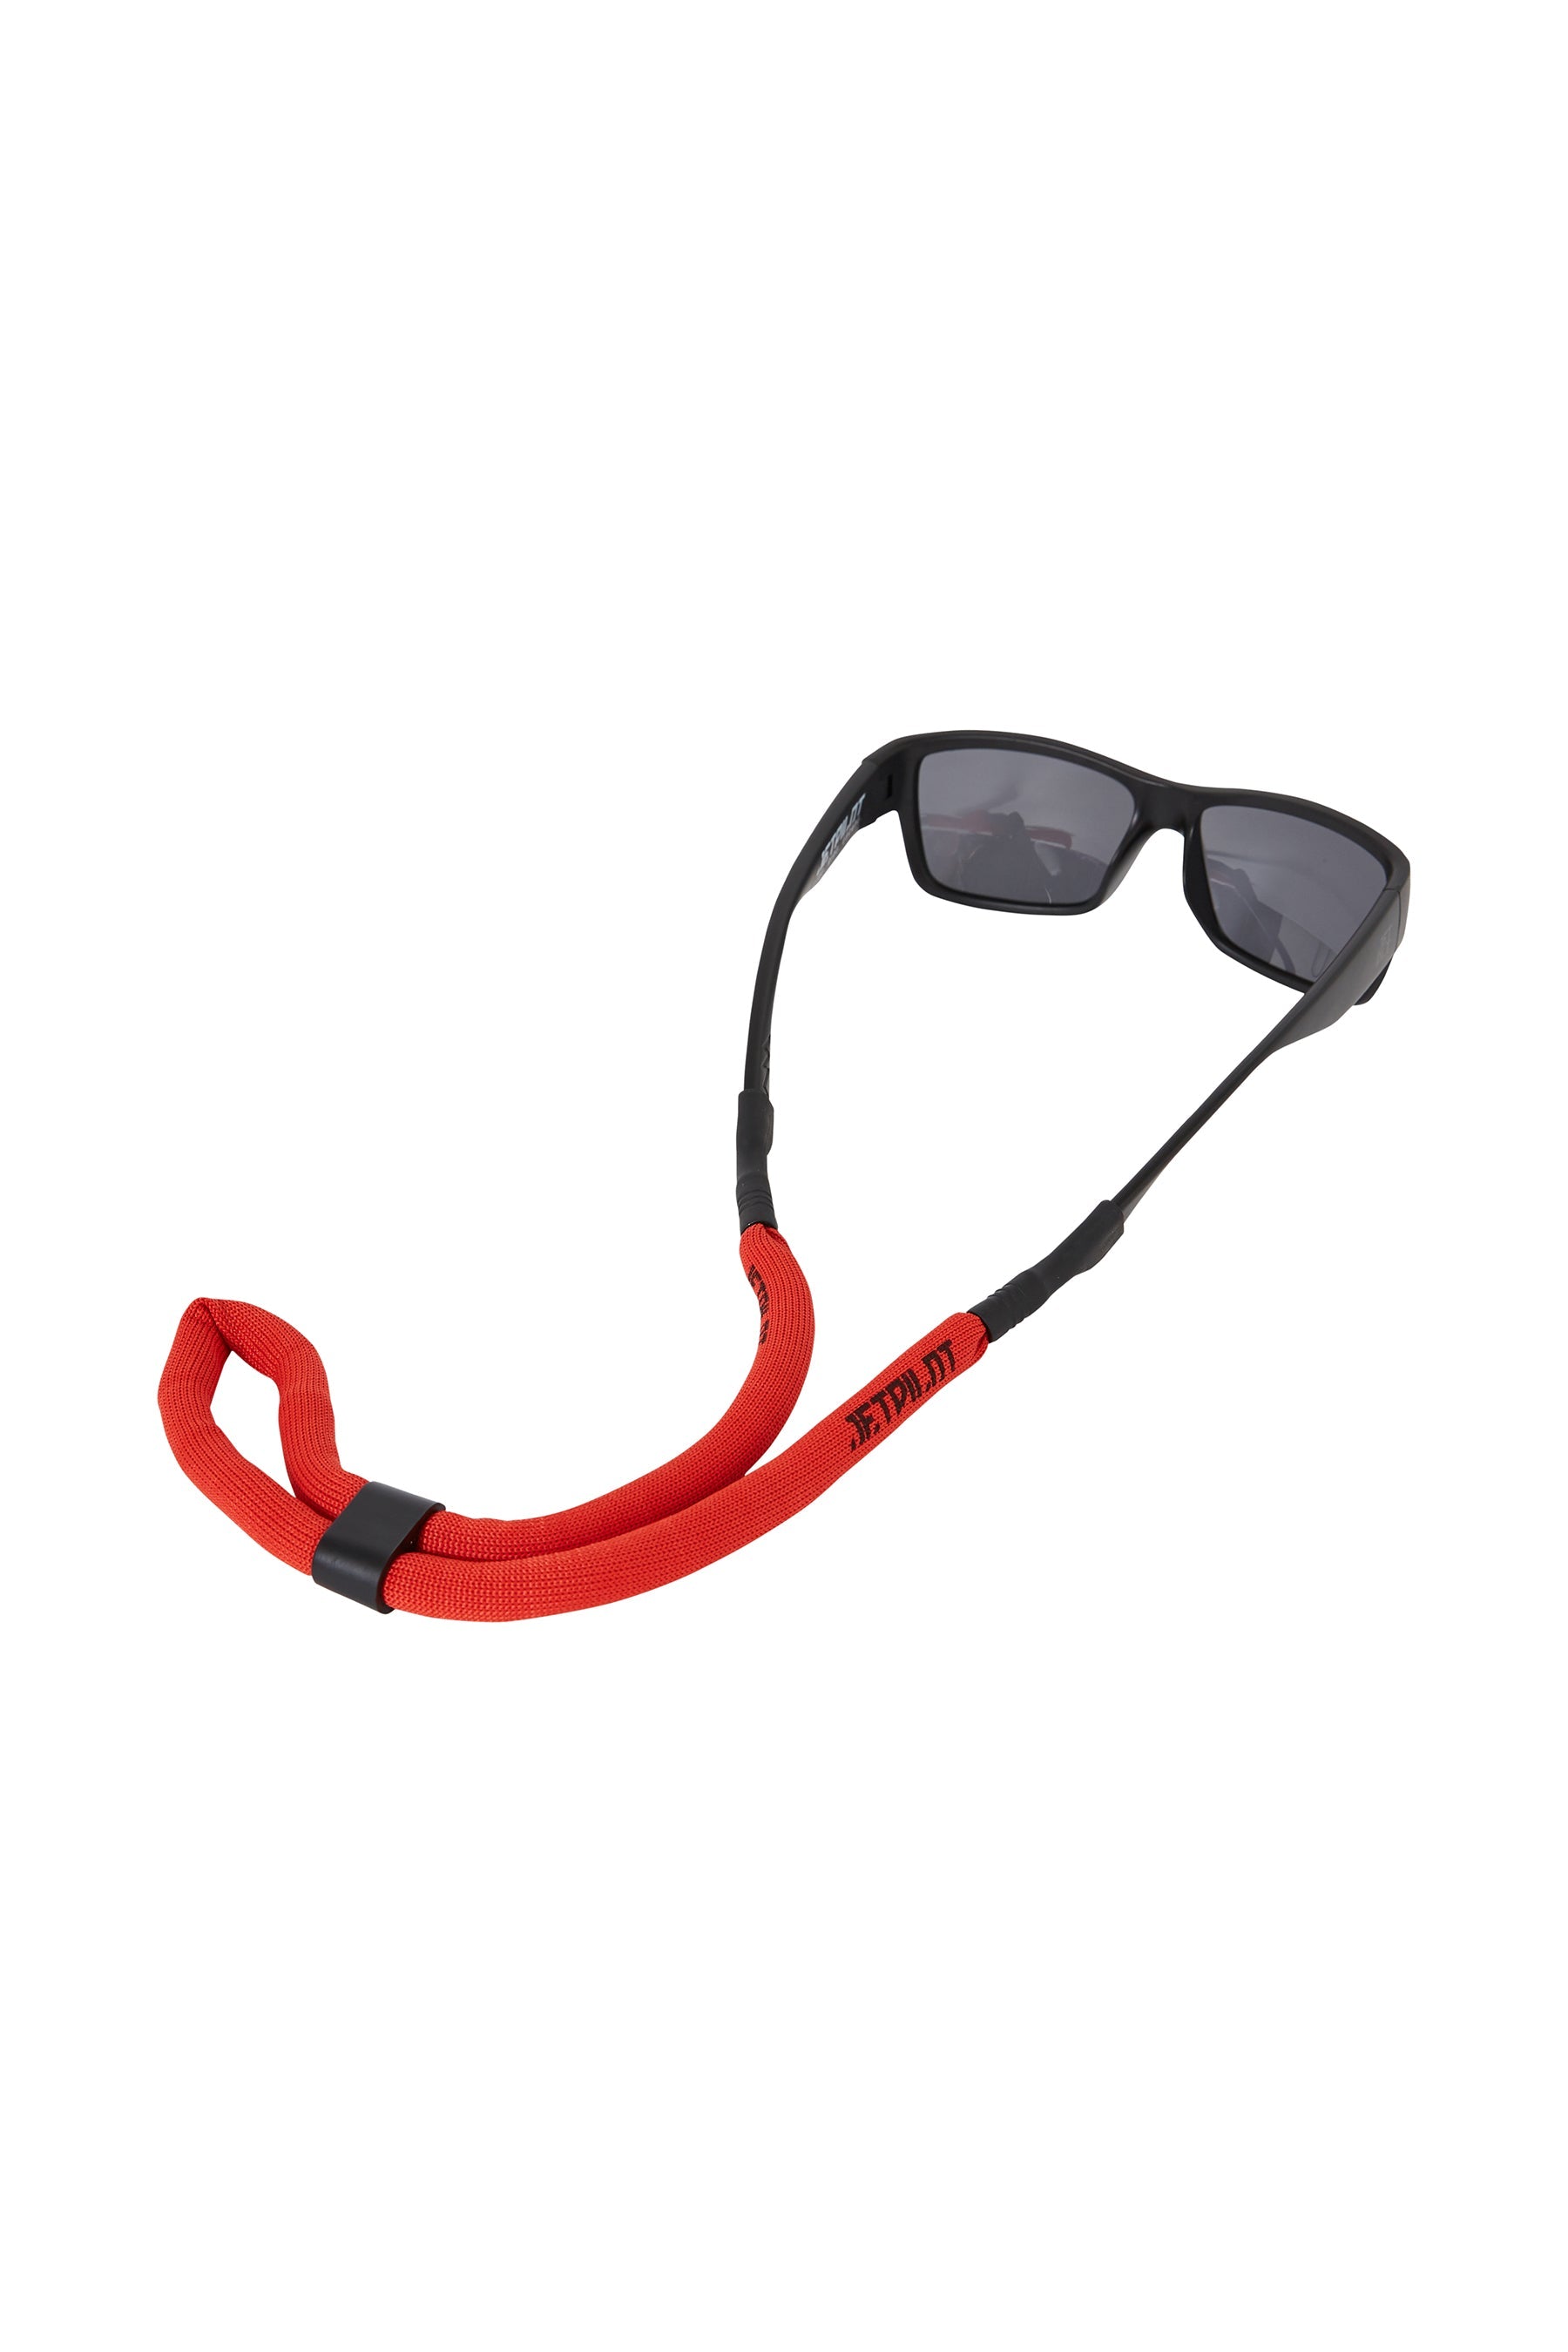 Jetpilot Floating Sunnie Retainers - Red Lifestyle 1